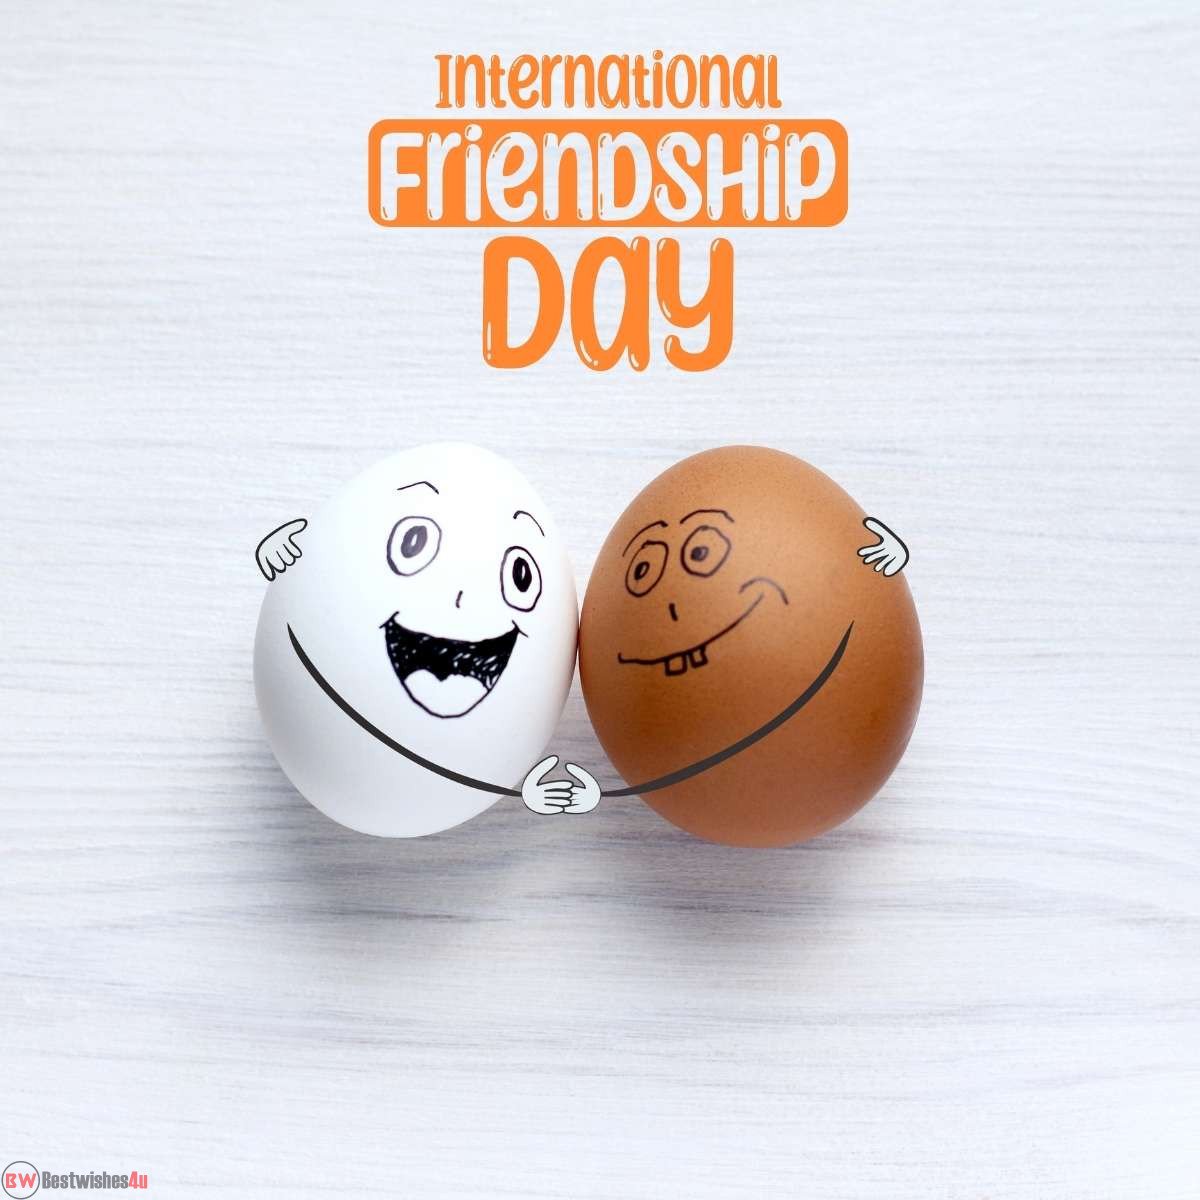 happy friendship day images, friendship day photos